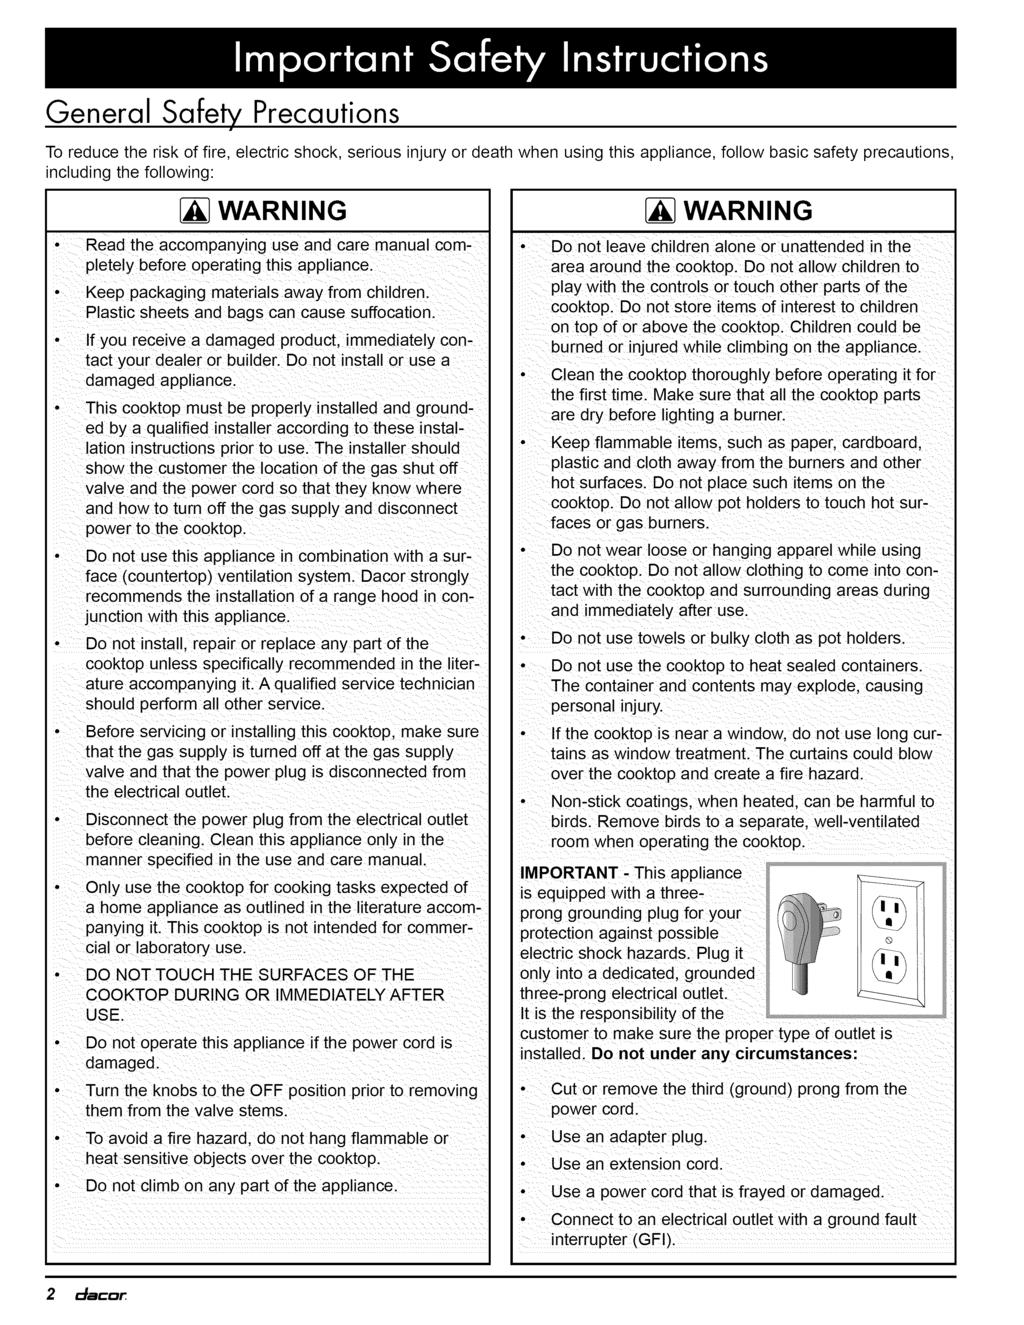 General Safety Precautions To reduce the risk of fire electric shock serious injury or death when using this appliance including the following: Read the accompanying use and care manual completely